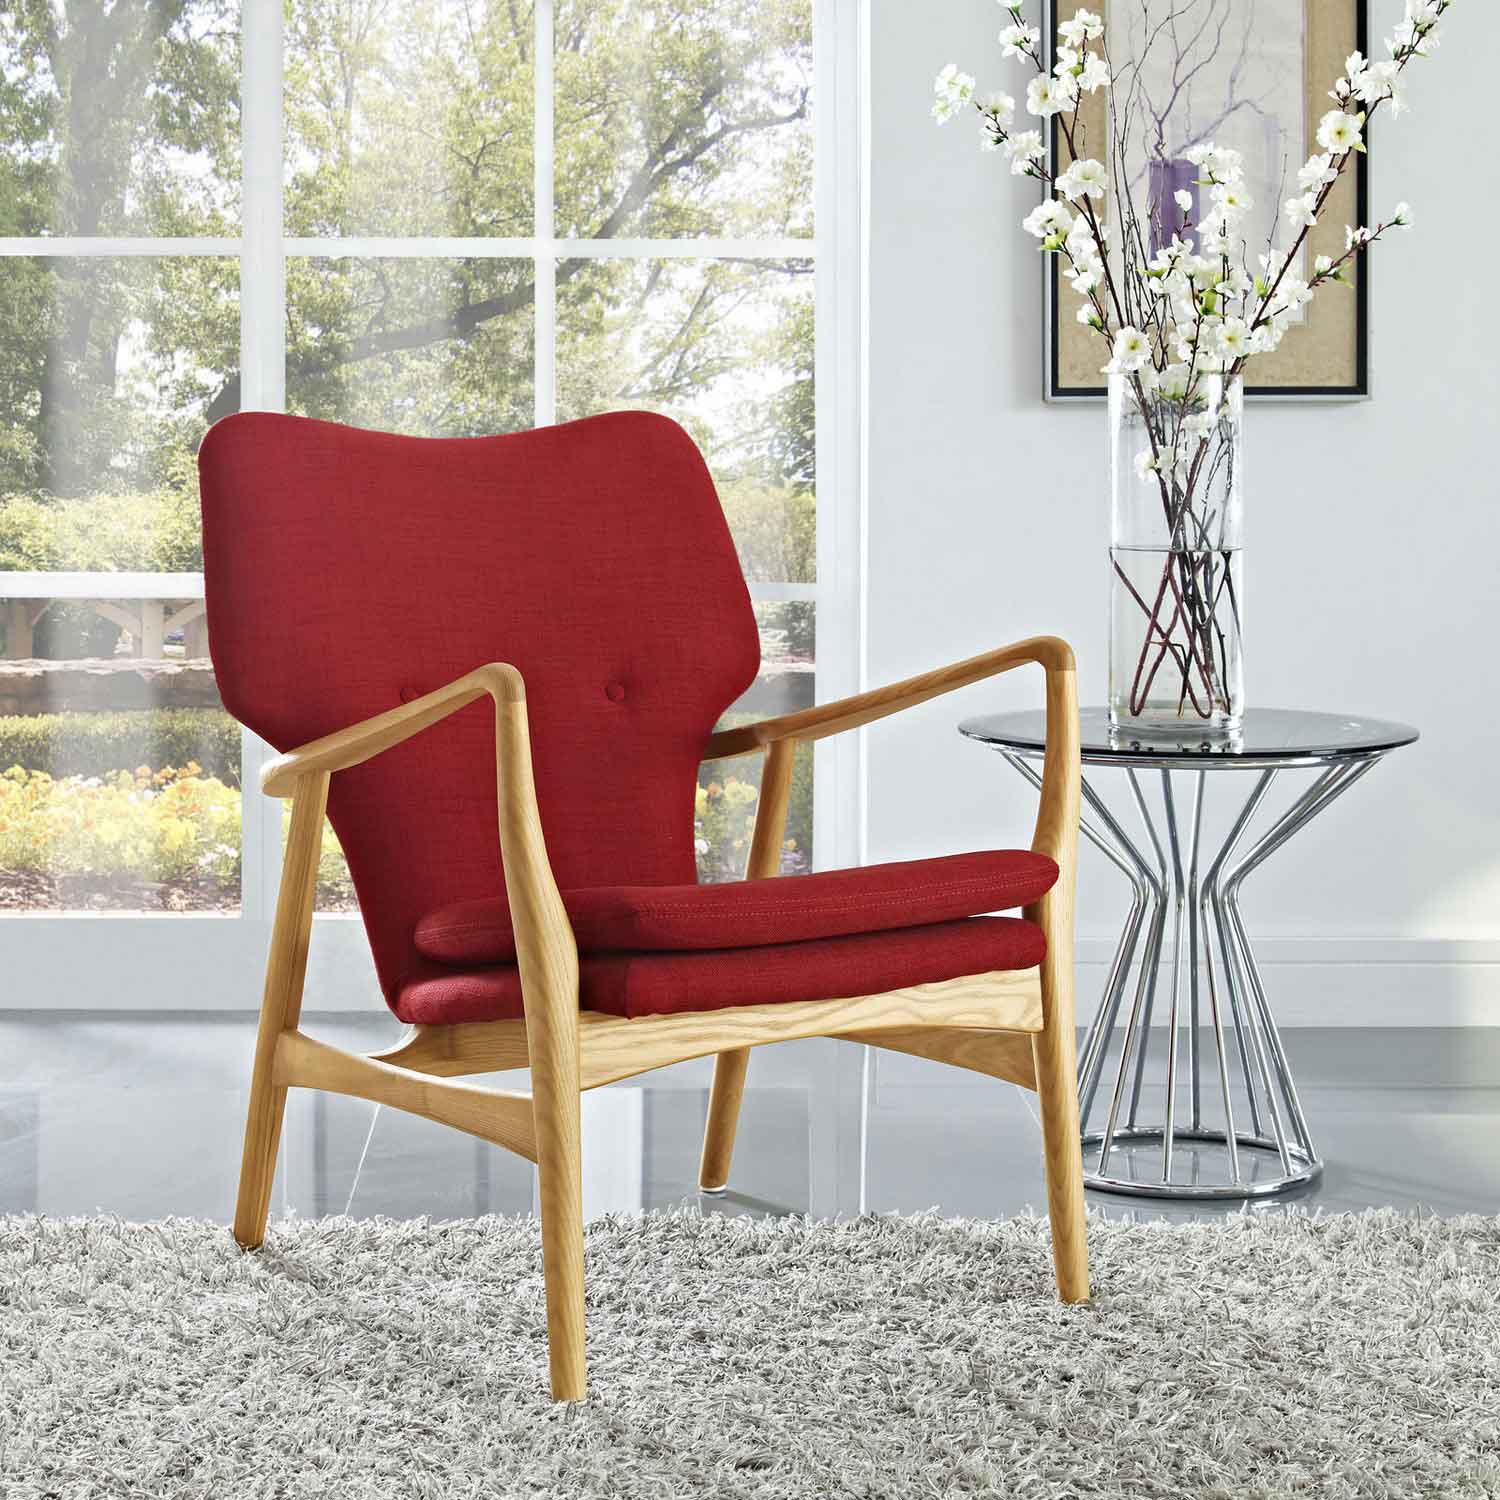 Modway Heed Lounge Chair - Birch Red